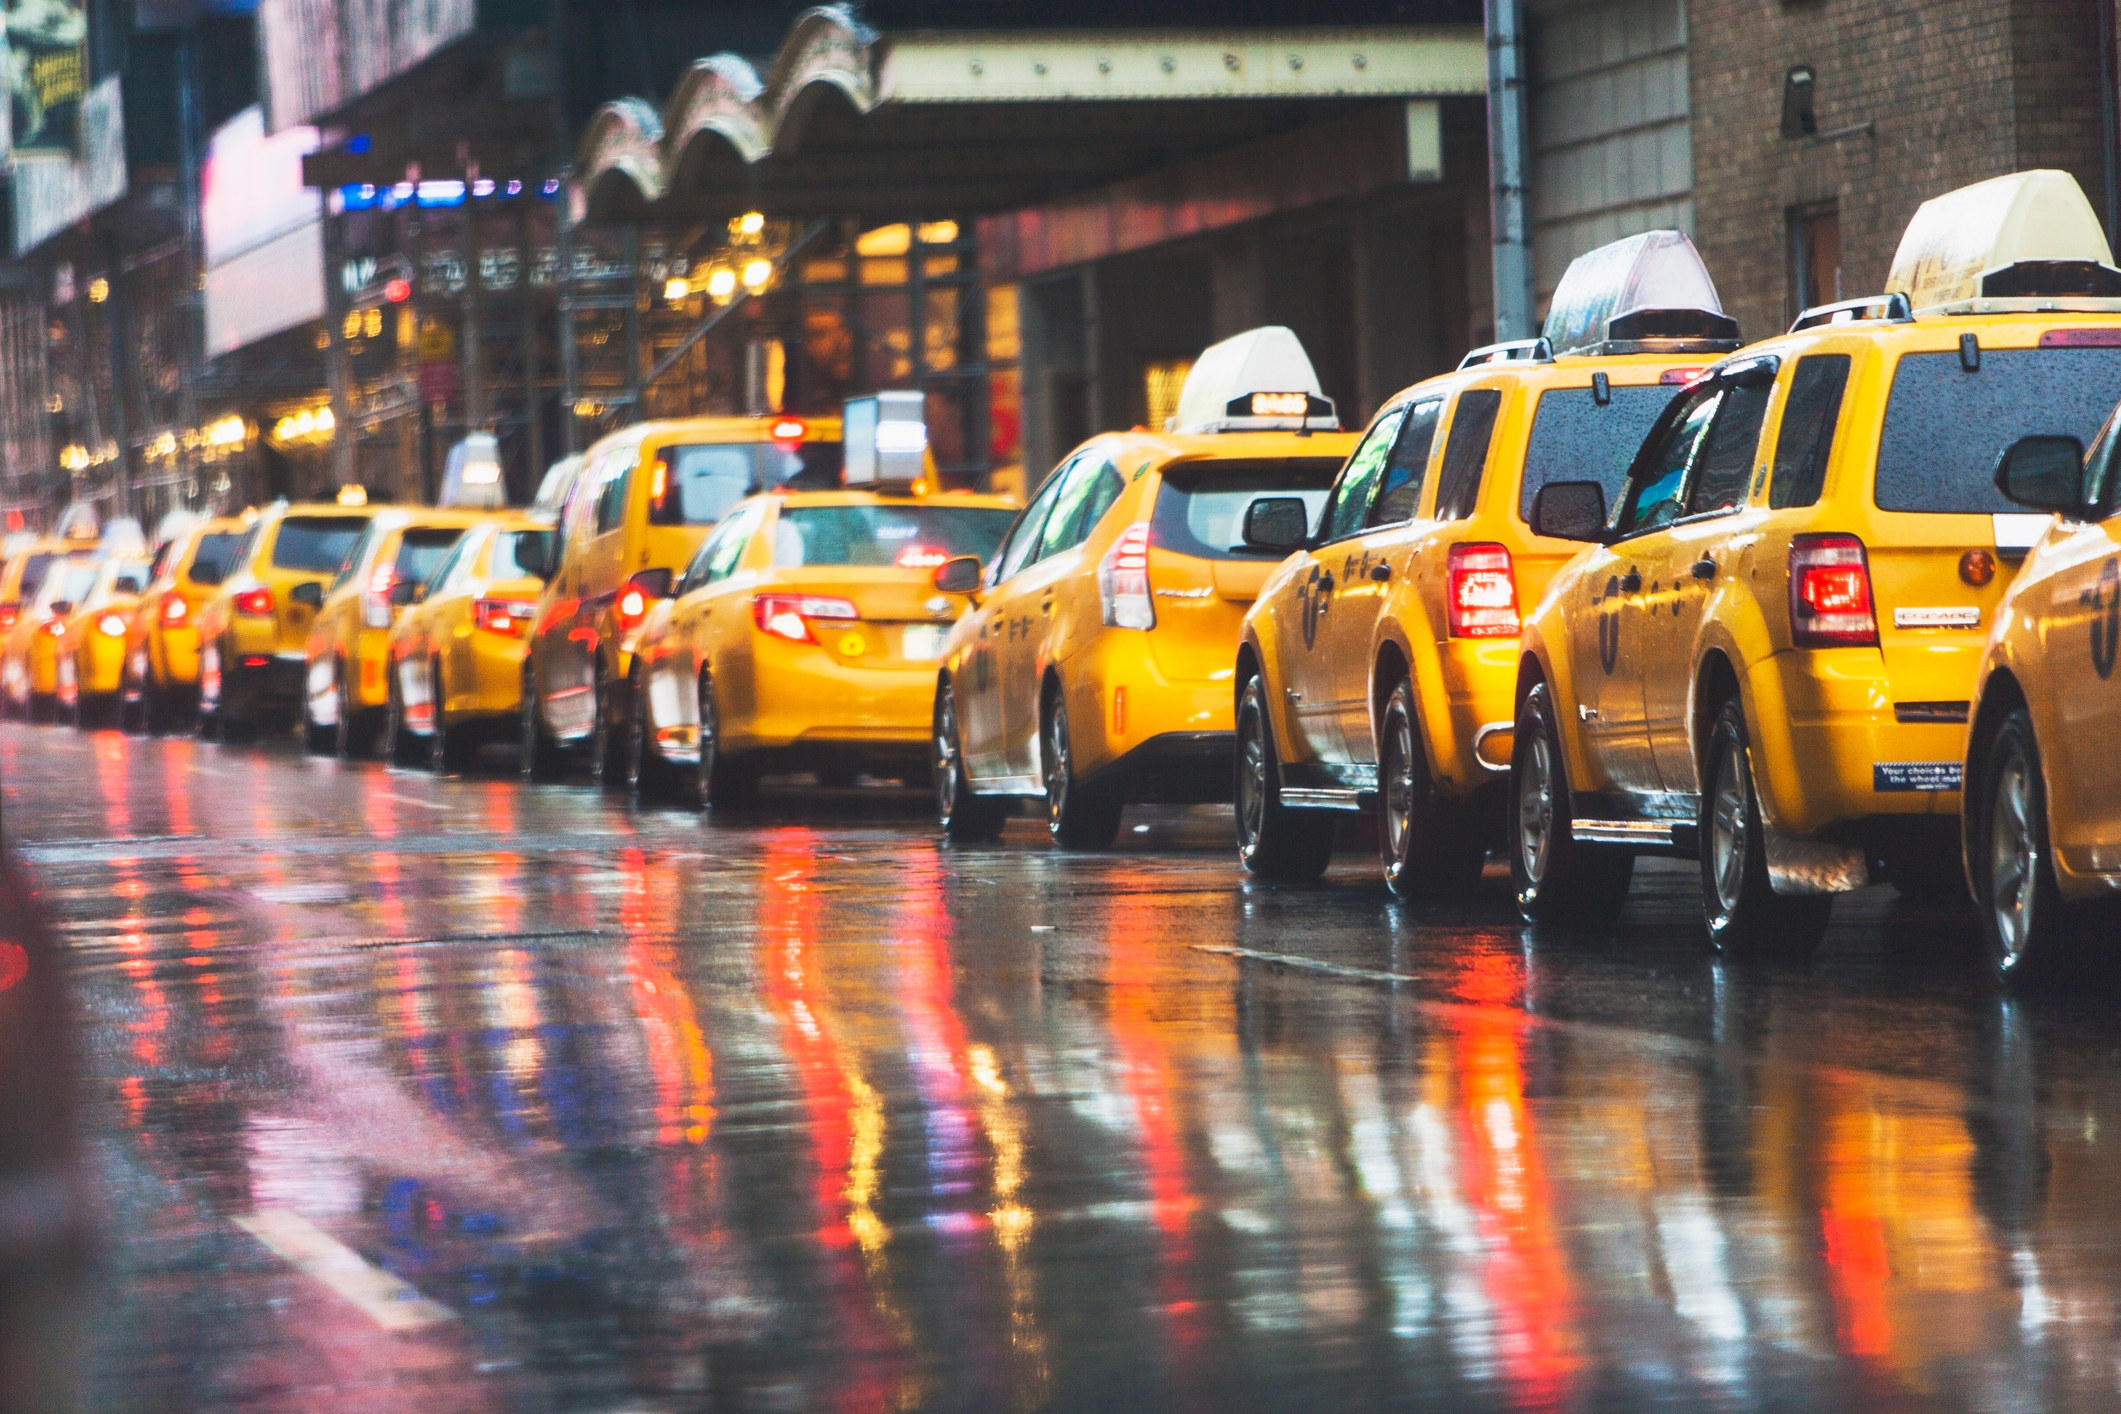 A row of taxis on the street